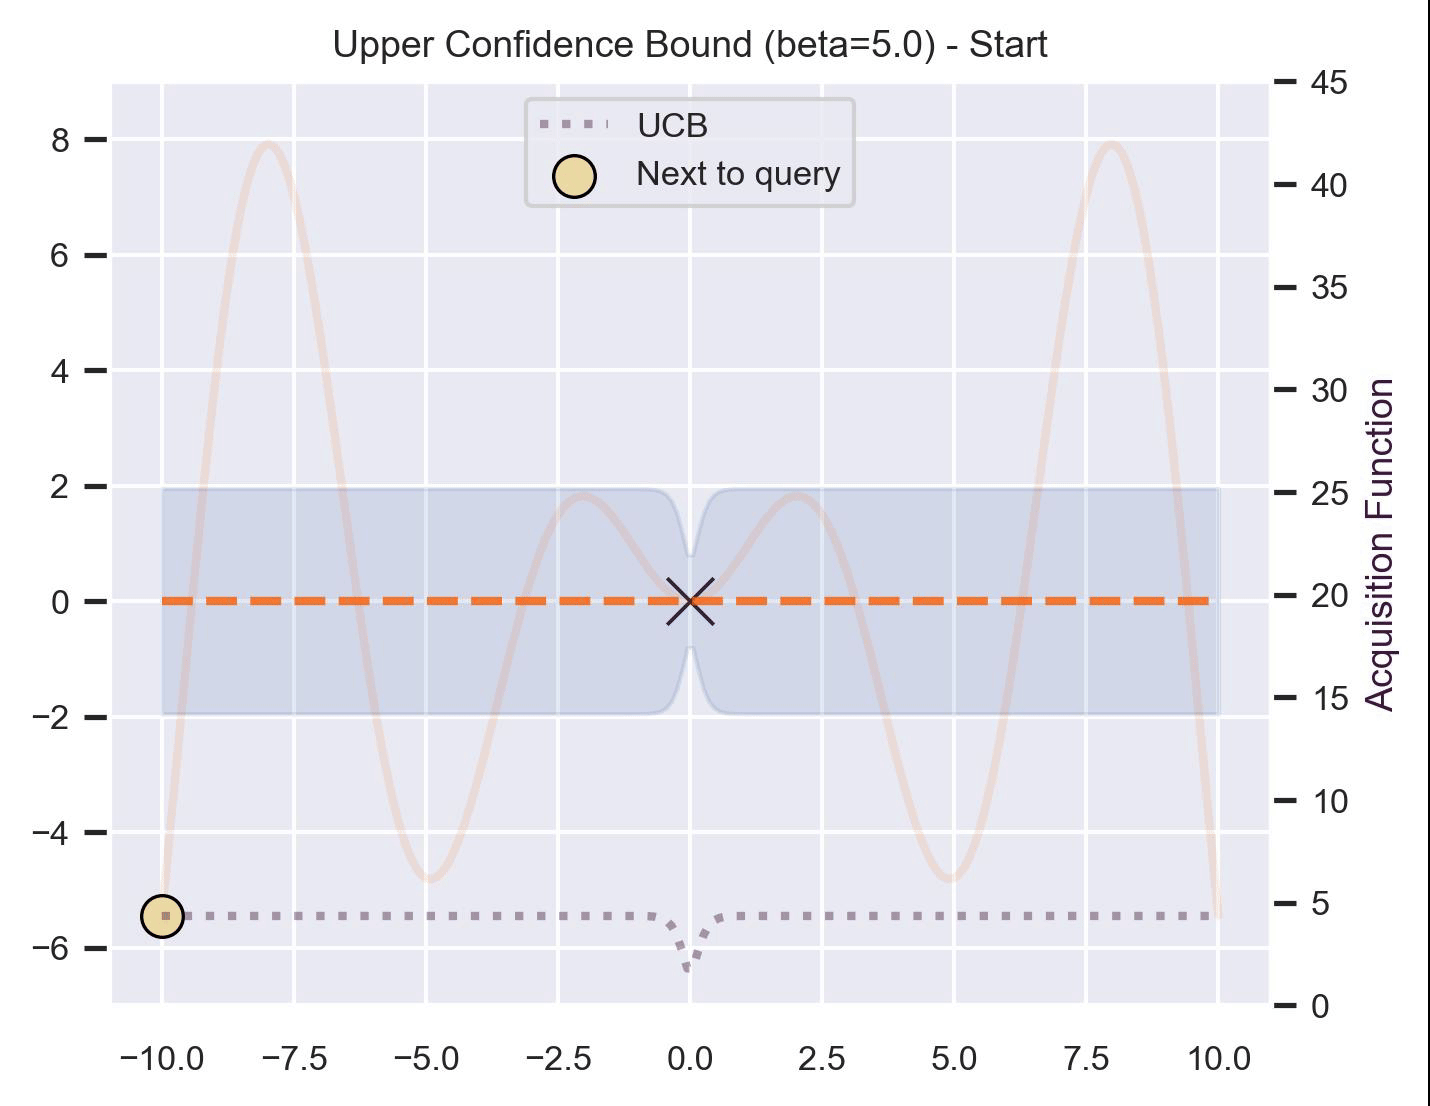 A GIF showing how Upper Confidence Bound-based Bayesian Optimization works: we fit a Gaussian Process and use the uncertainty estimates to compute the mean plus a multiple of the standard deviation, which we consider an optimistic choice for where to sample next. In this case, the beta is chosen to be 5.